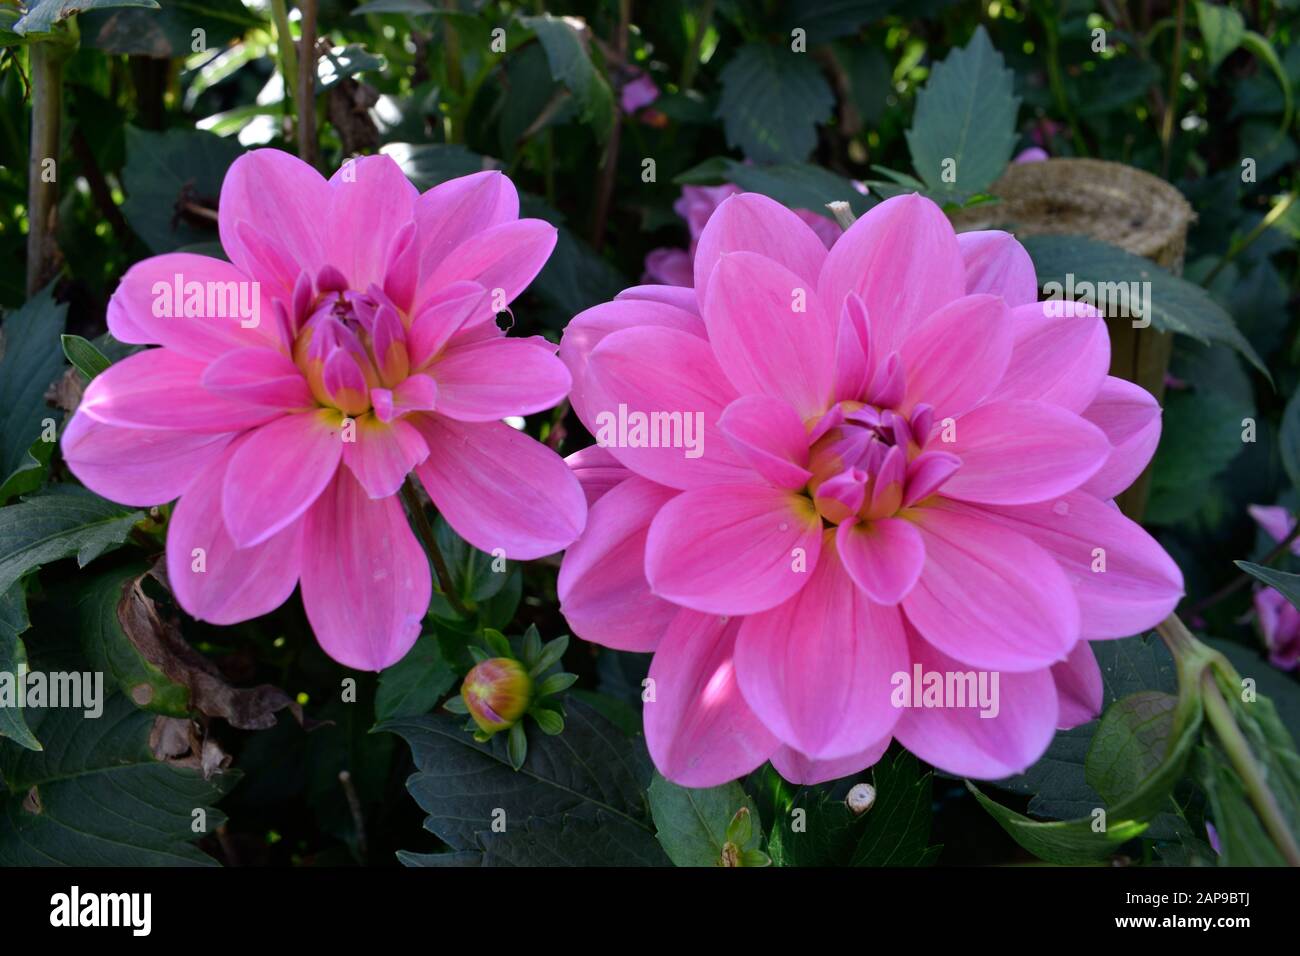 Dahlia name Onesta. Close up of two pink flowers. Stock Photo